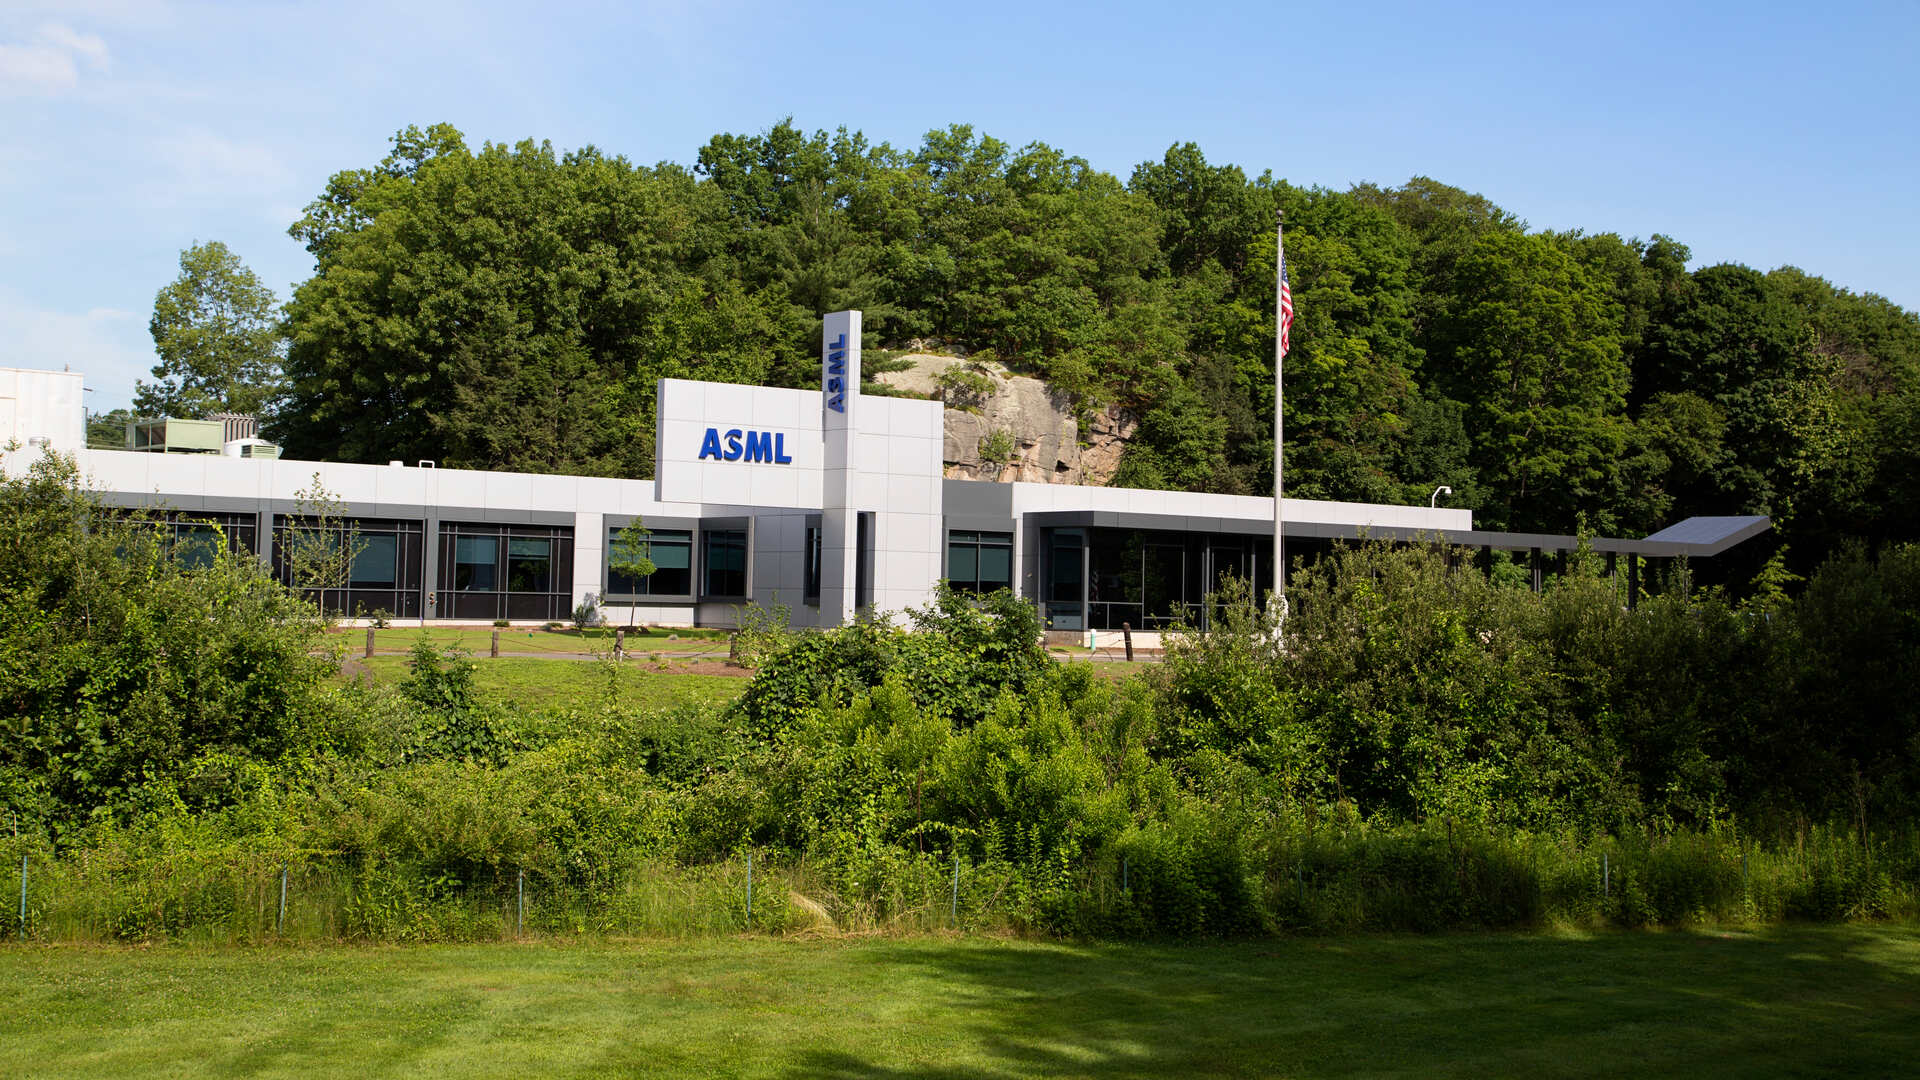 Wilton CT USA  ASMLs office and manufacturing site cropped